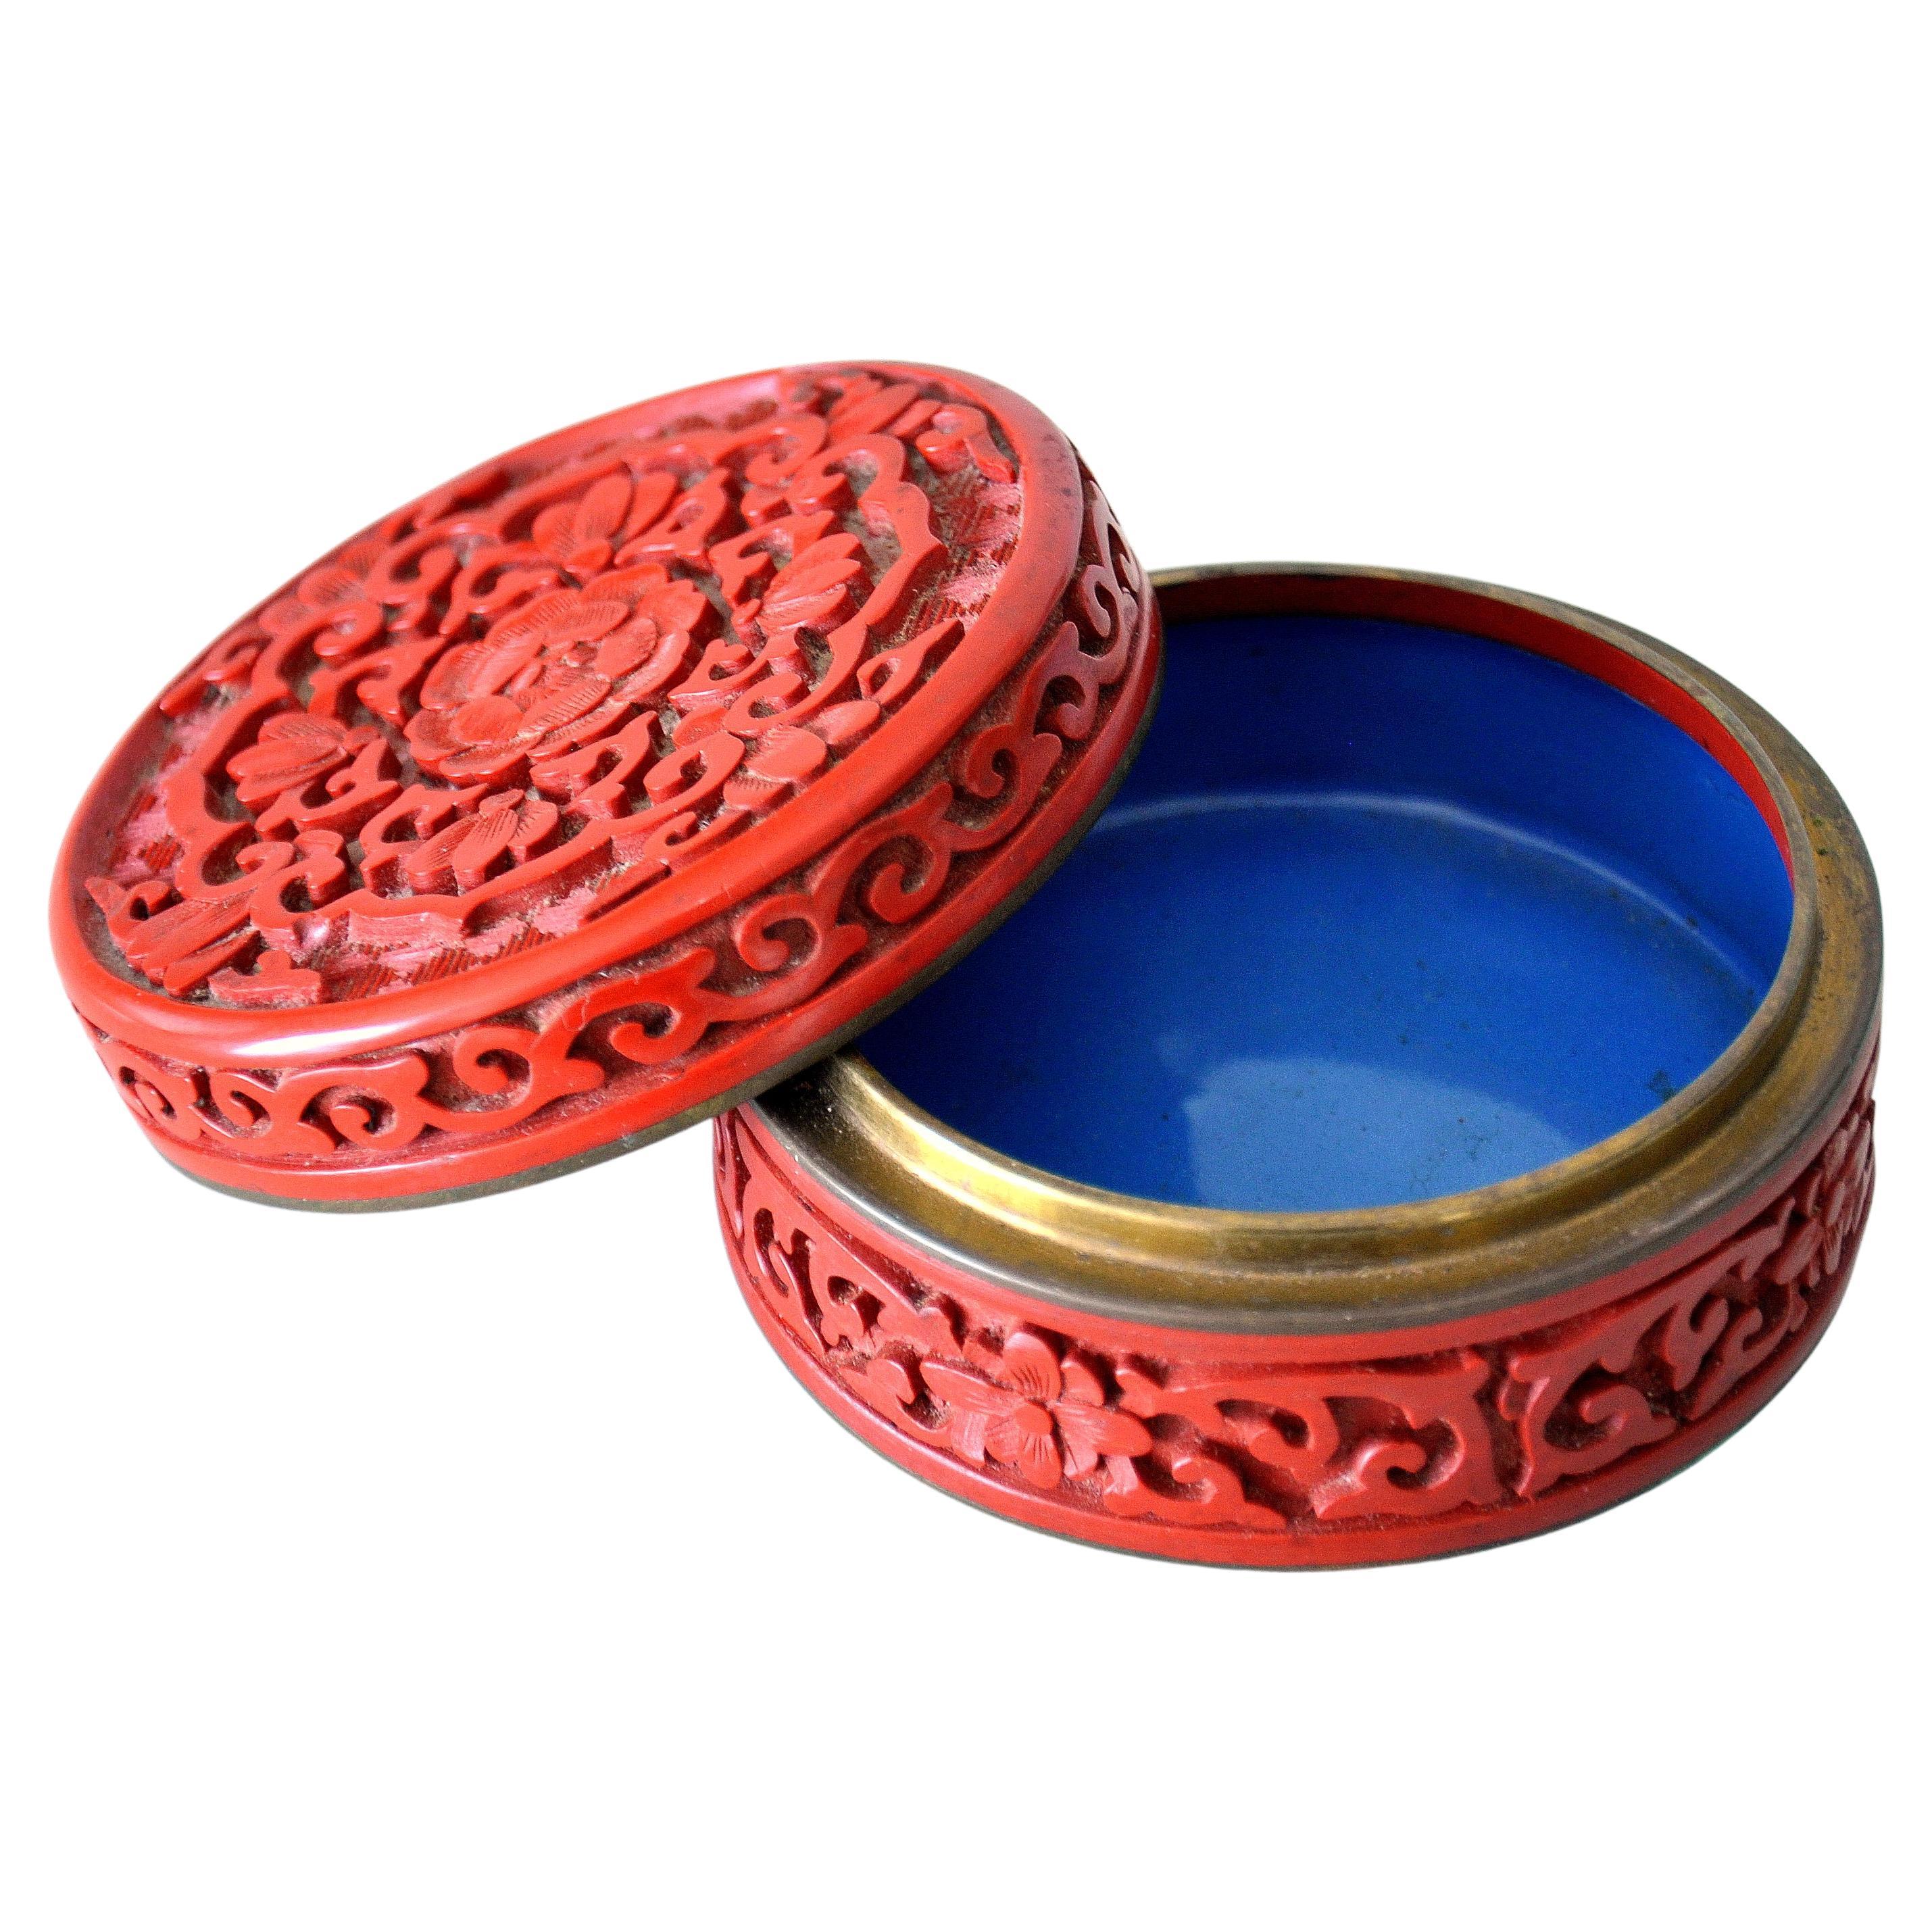 A crisply carved antique Chinese red cinnabar lacquer lidded round box with blue enamel interior and brass fittings. The 